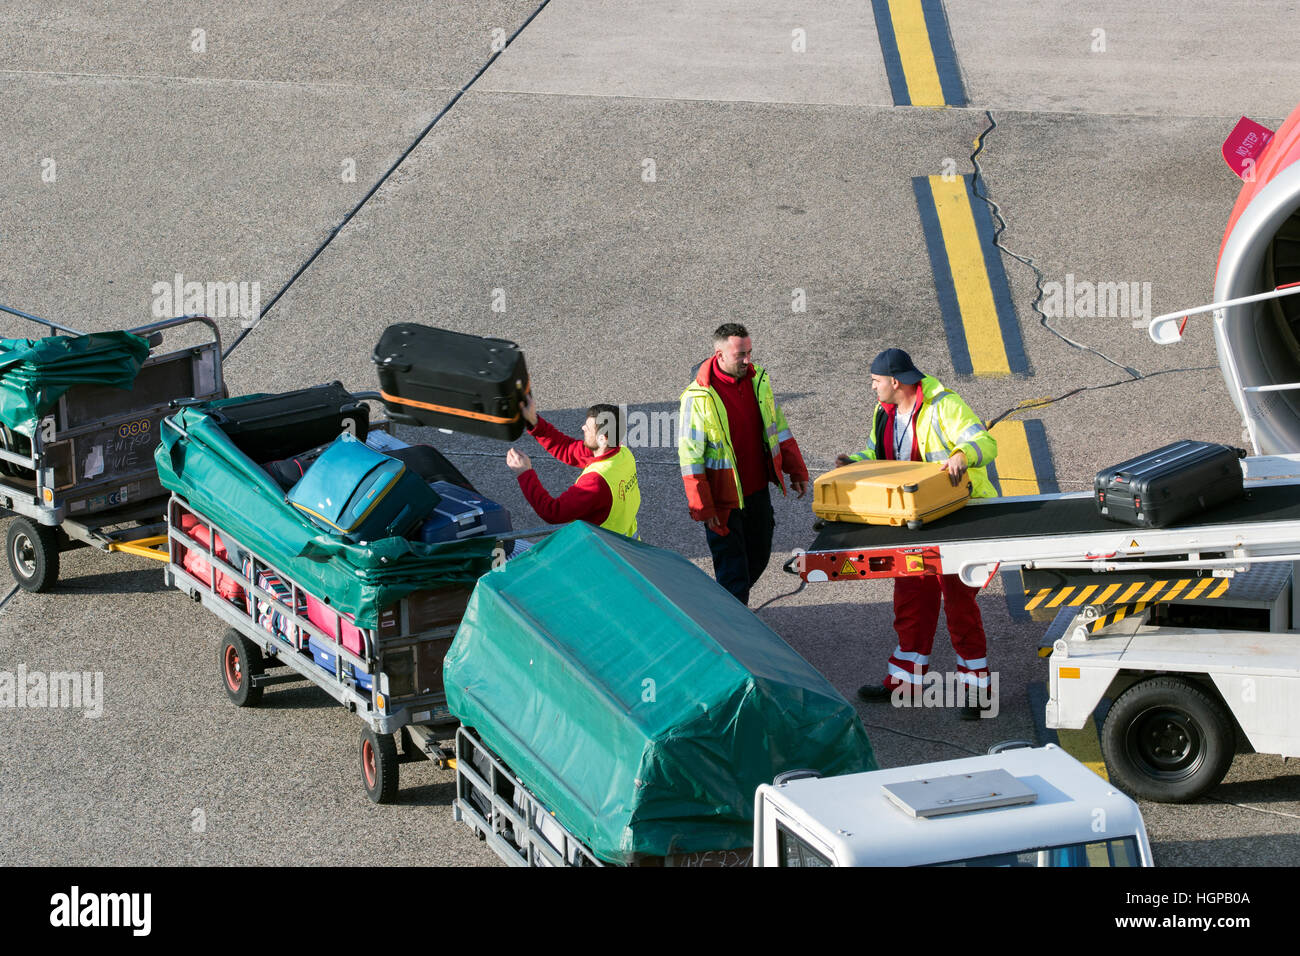 Baggage handlers unloading luggage from an airplane at Dusseldorf airport. Stock Photo